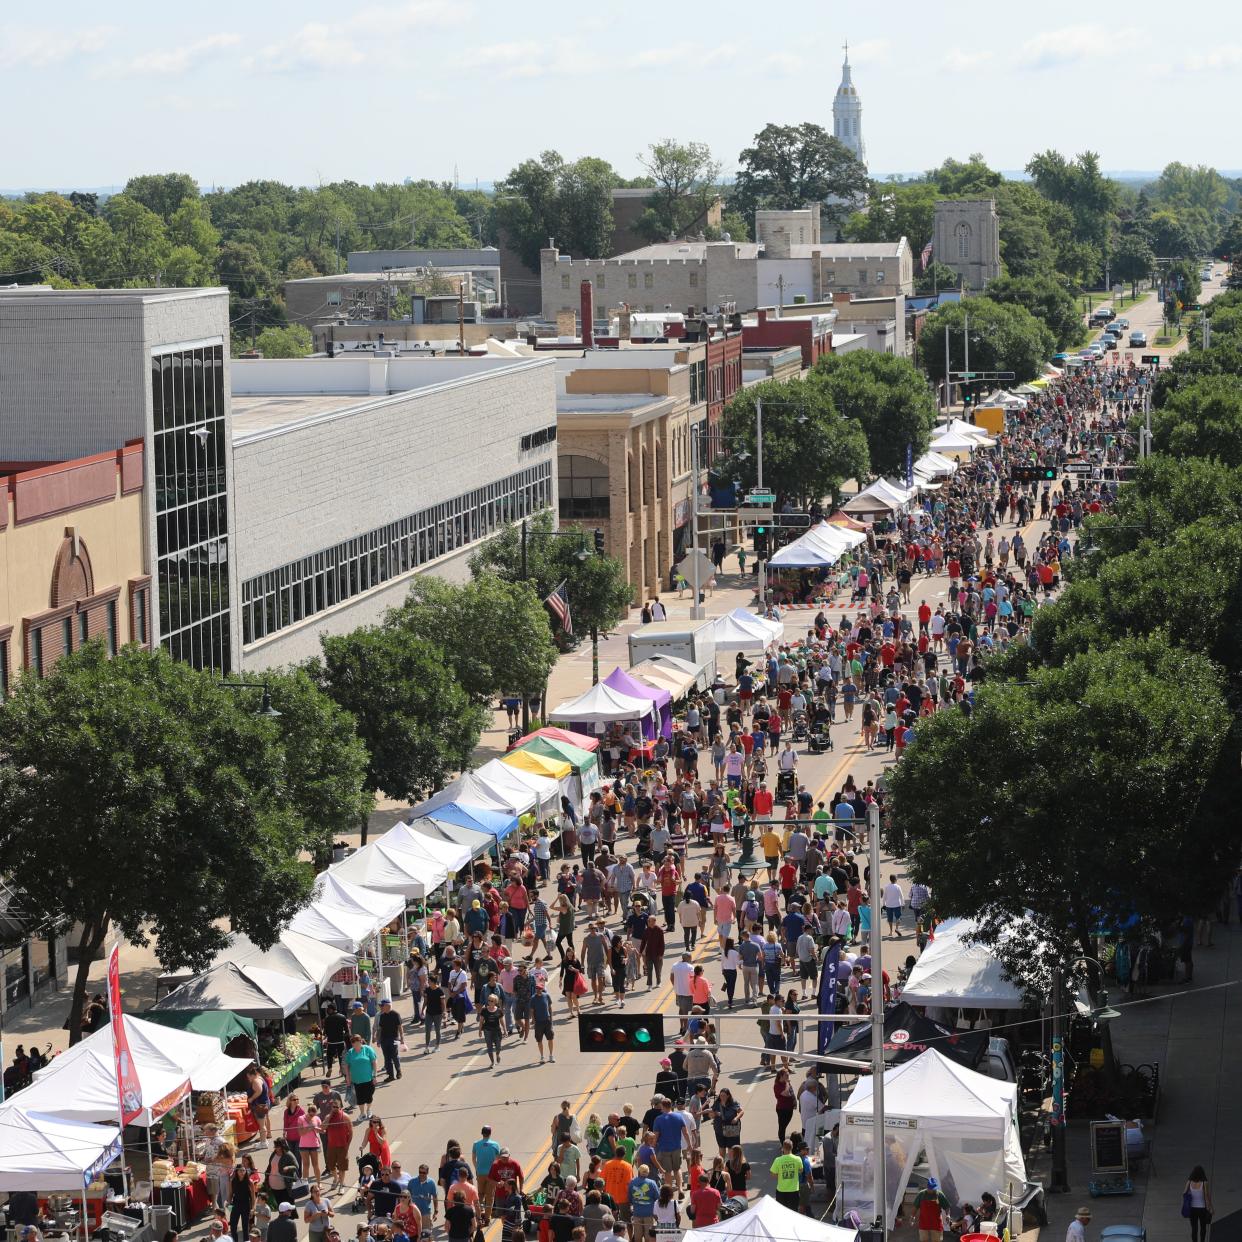 The Downtown Appleton Farm Market is a favorite setting for food, crafts and music.